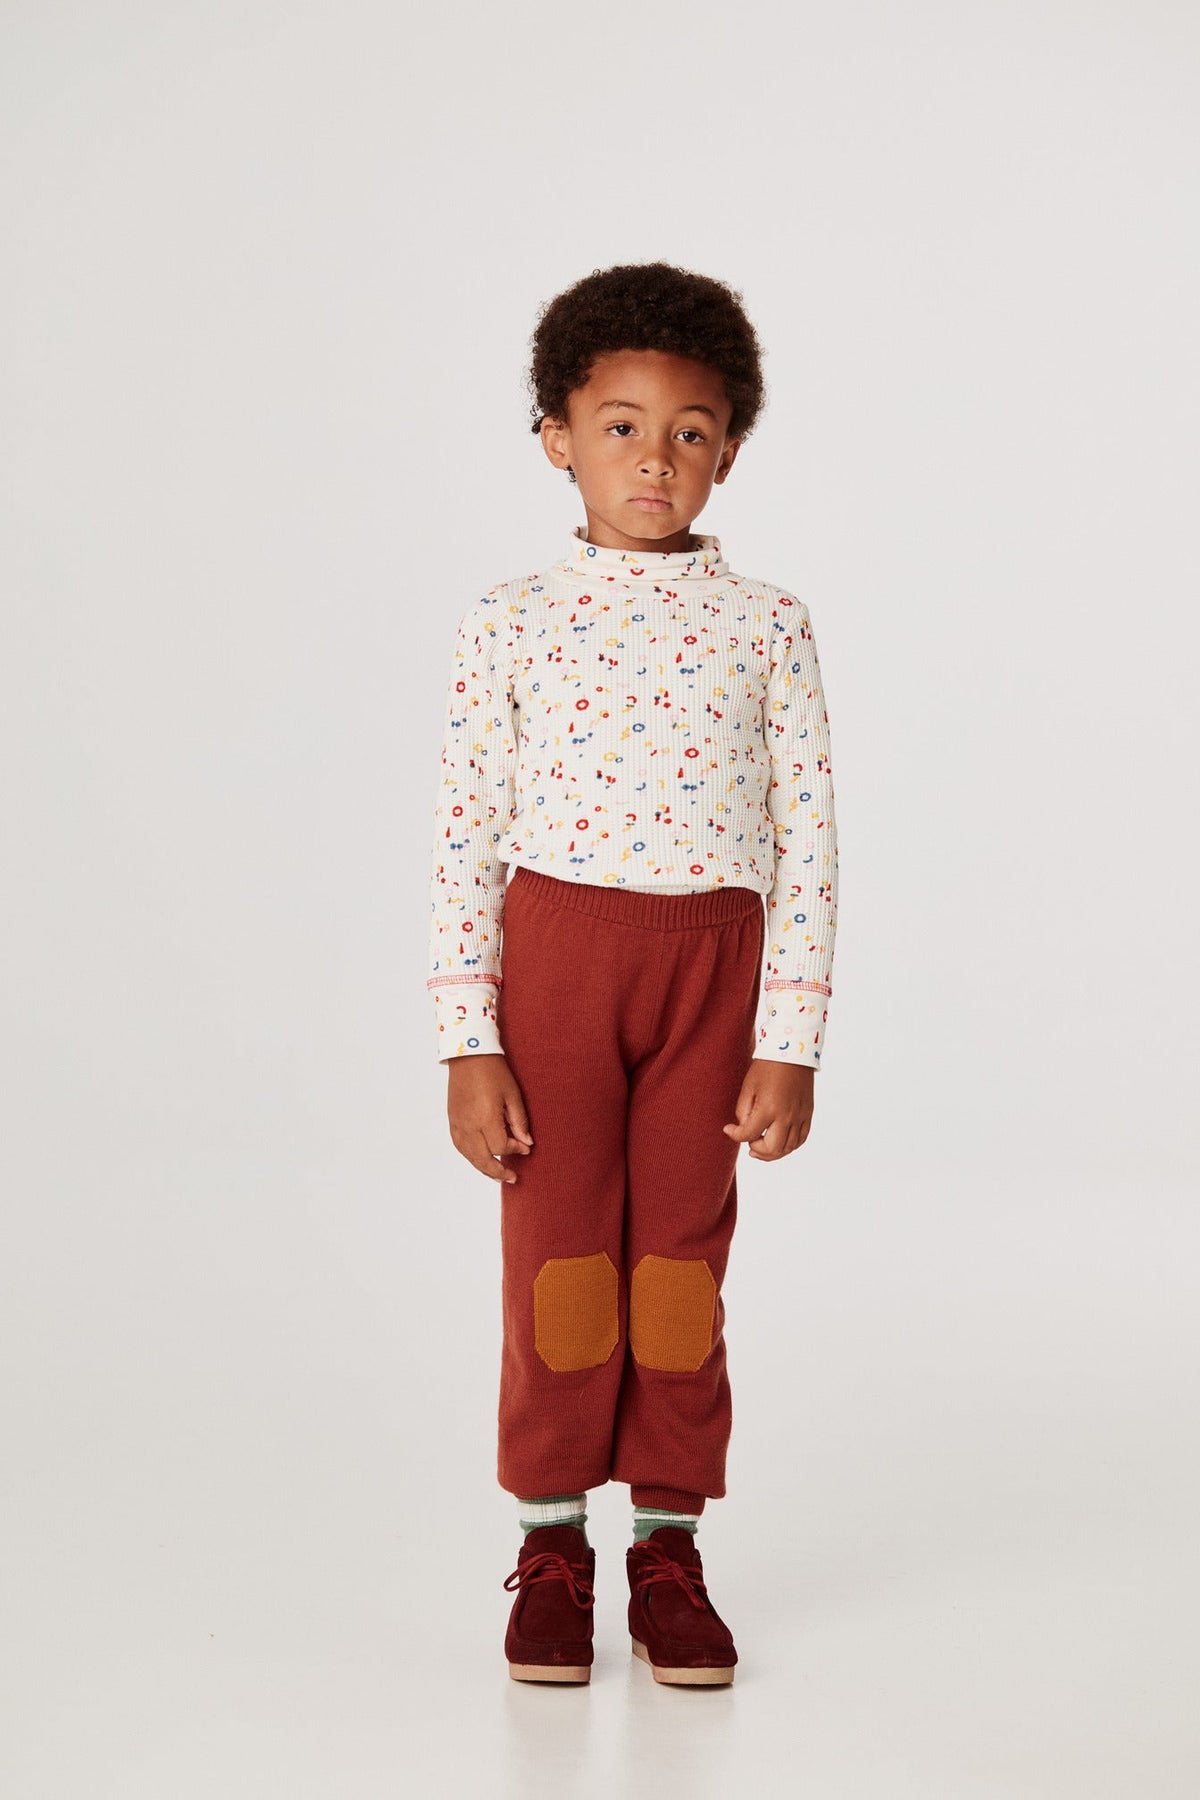 New Merino Jogger - Henna+Model is 45 inches tall, 46lbs, wearing a size 4-5y